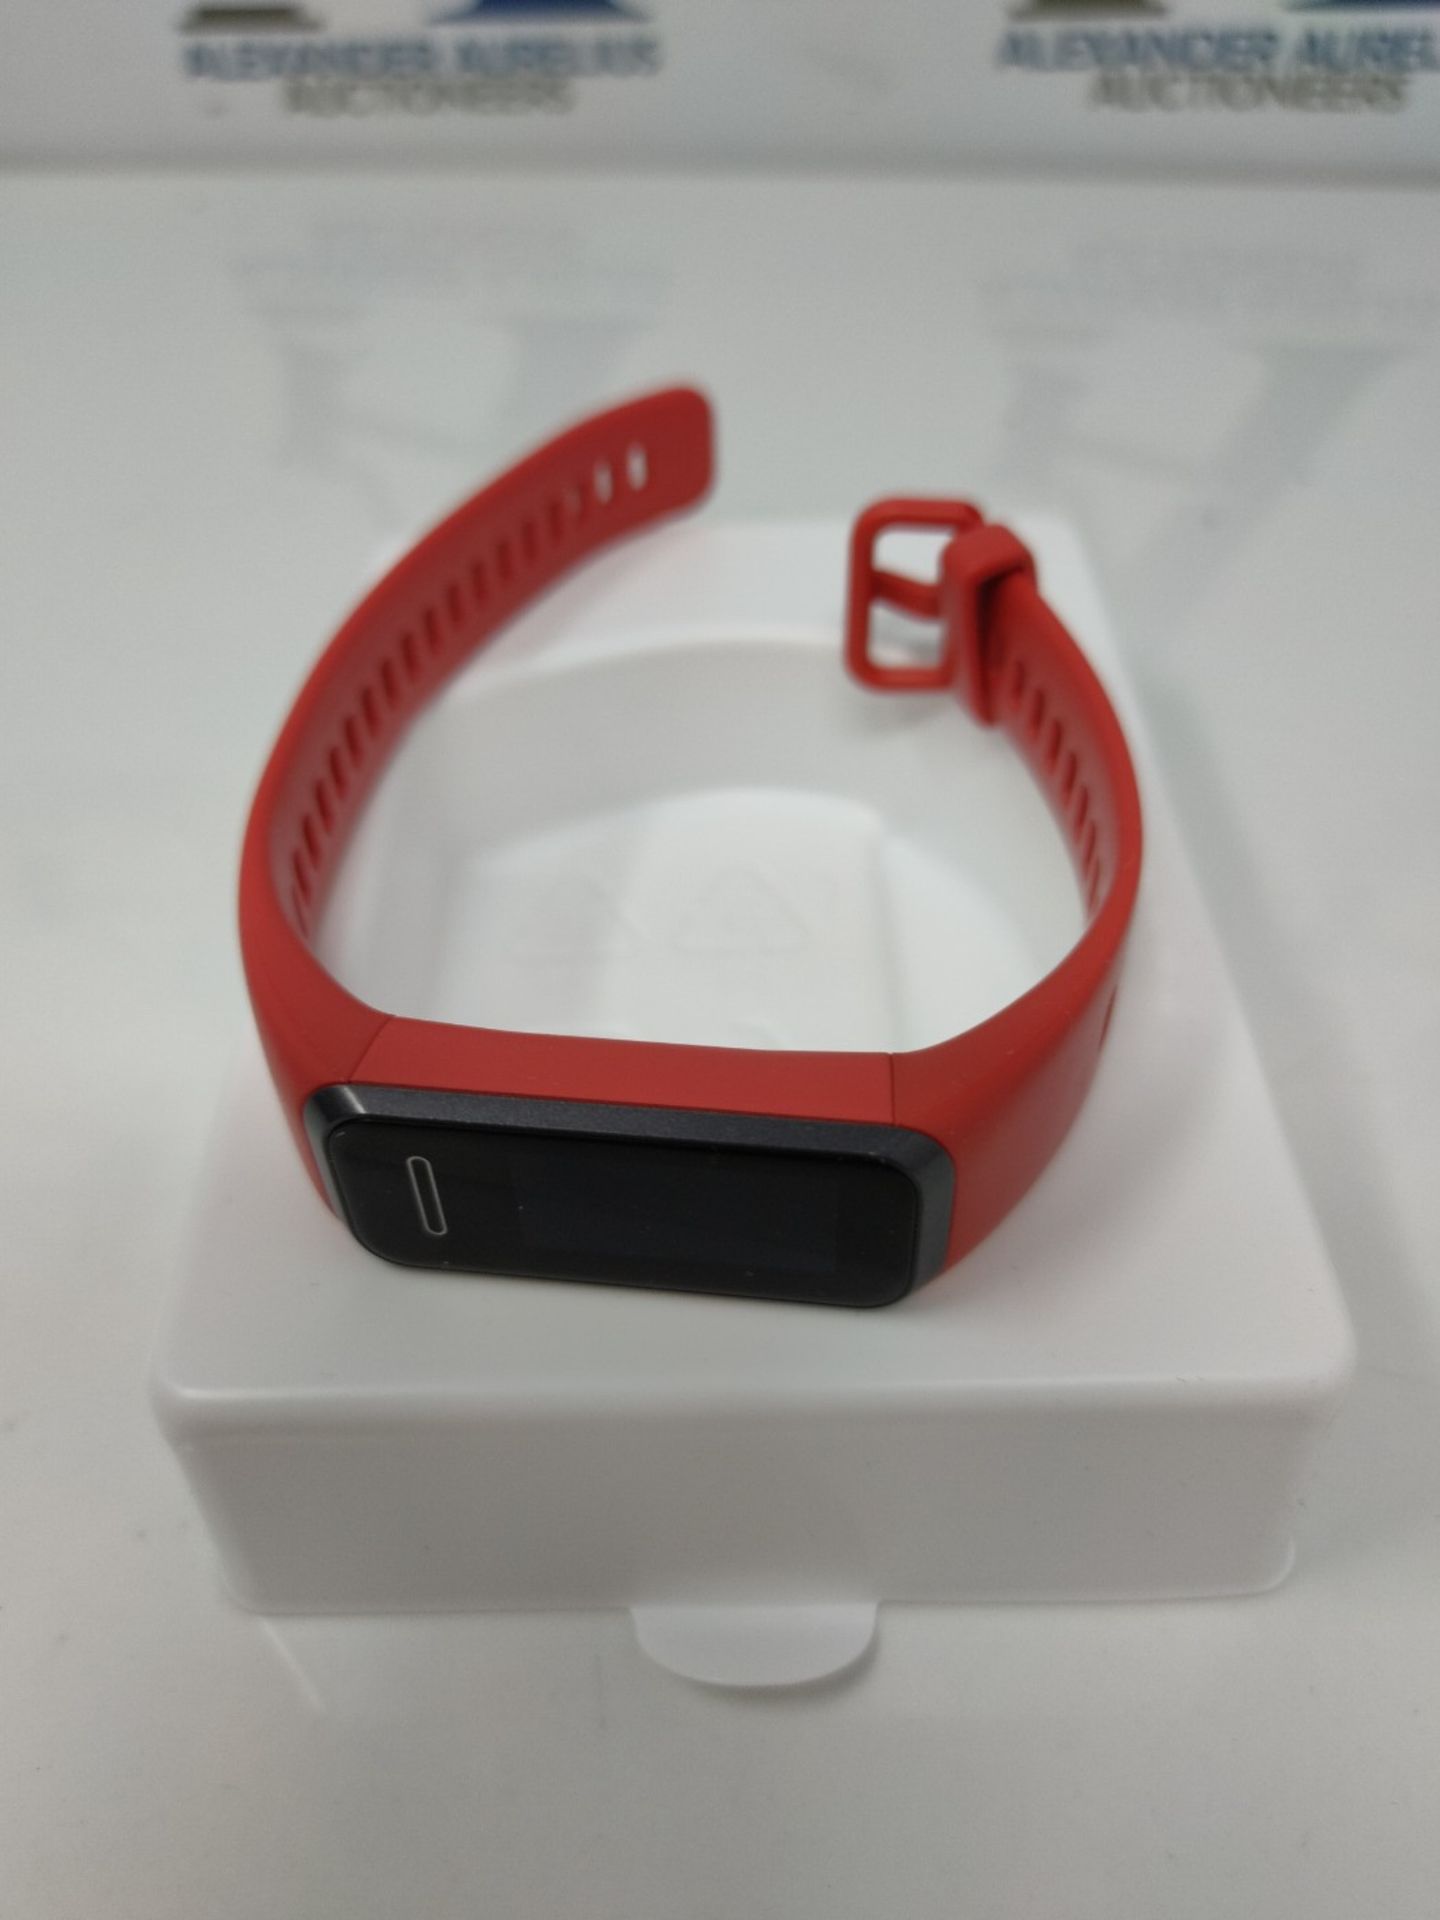 HUAWEI Band 4 Smart Band, Fitness Activities Tracker with 0.96" Color Screen, 24/7 Con - Bild 3 aus 3